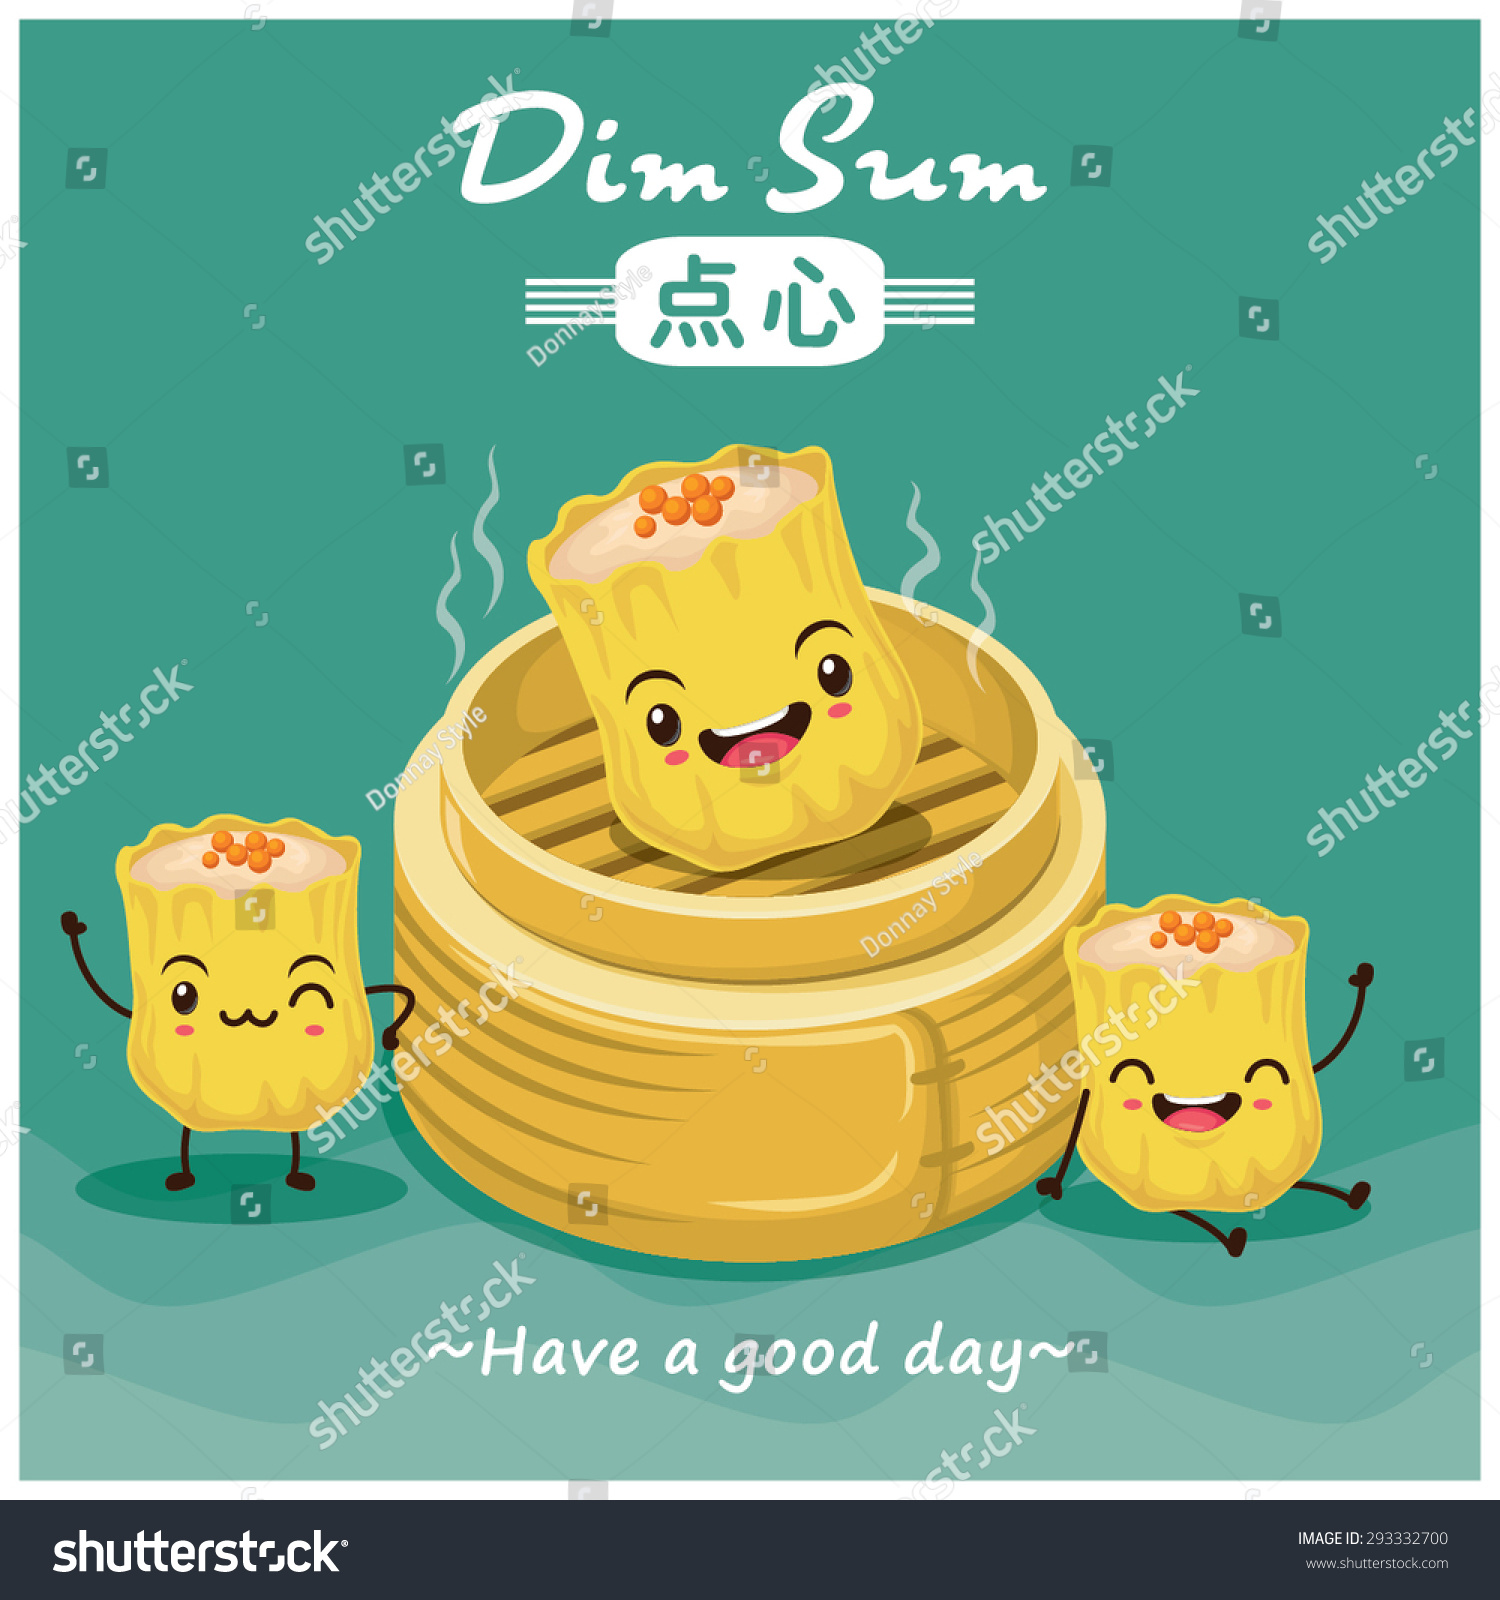 Vintage Dim Sum Cartoon Poster Design. Chinese Text Means A Chinese